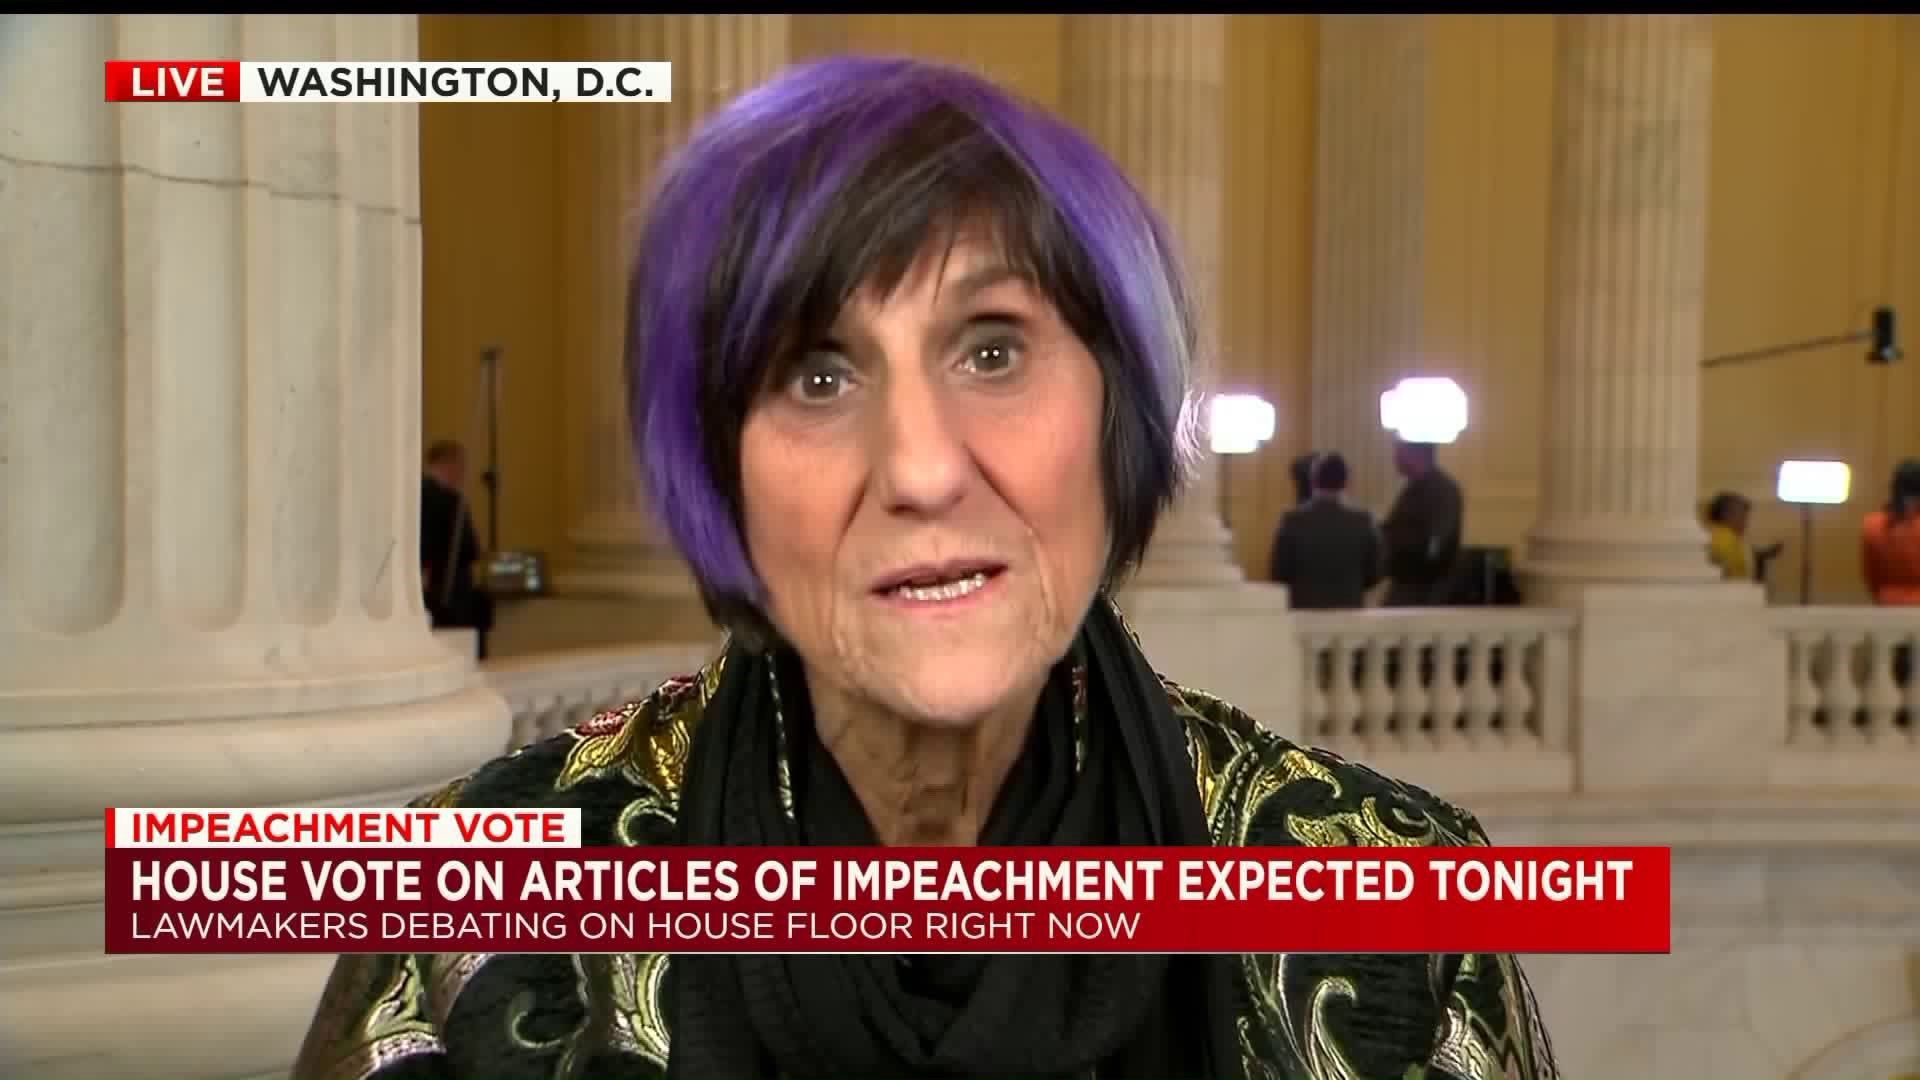 Rep. Rosa DeLauro speaks on House vote on articles of impeachment